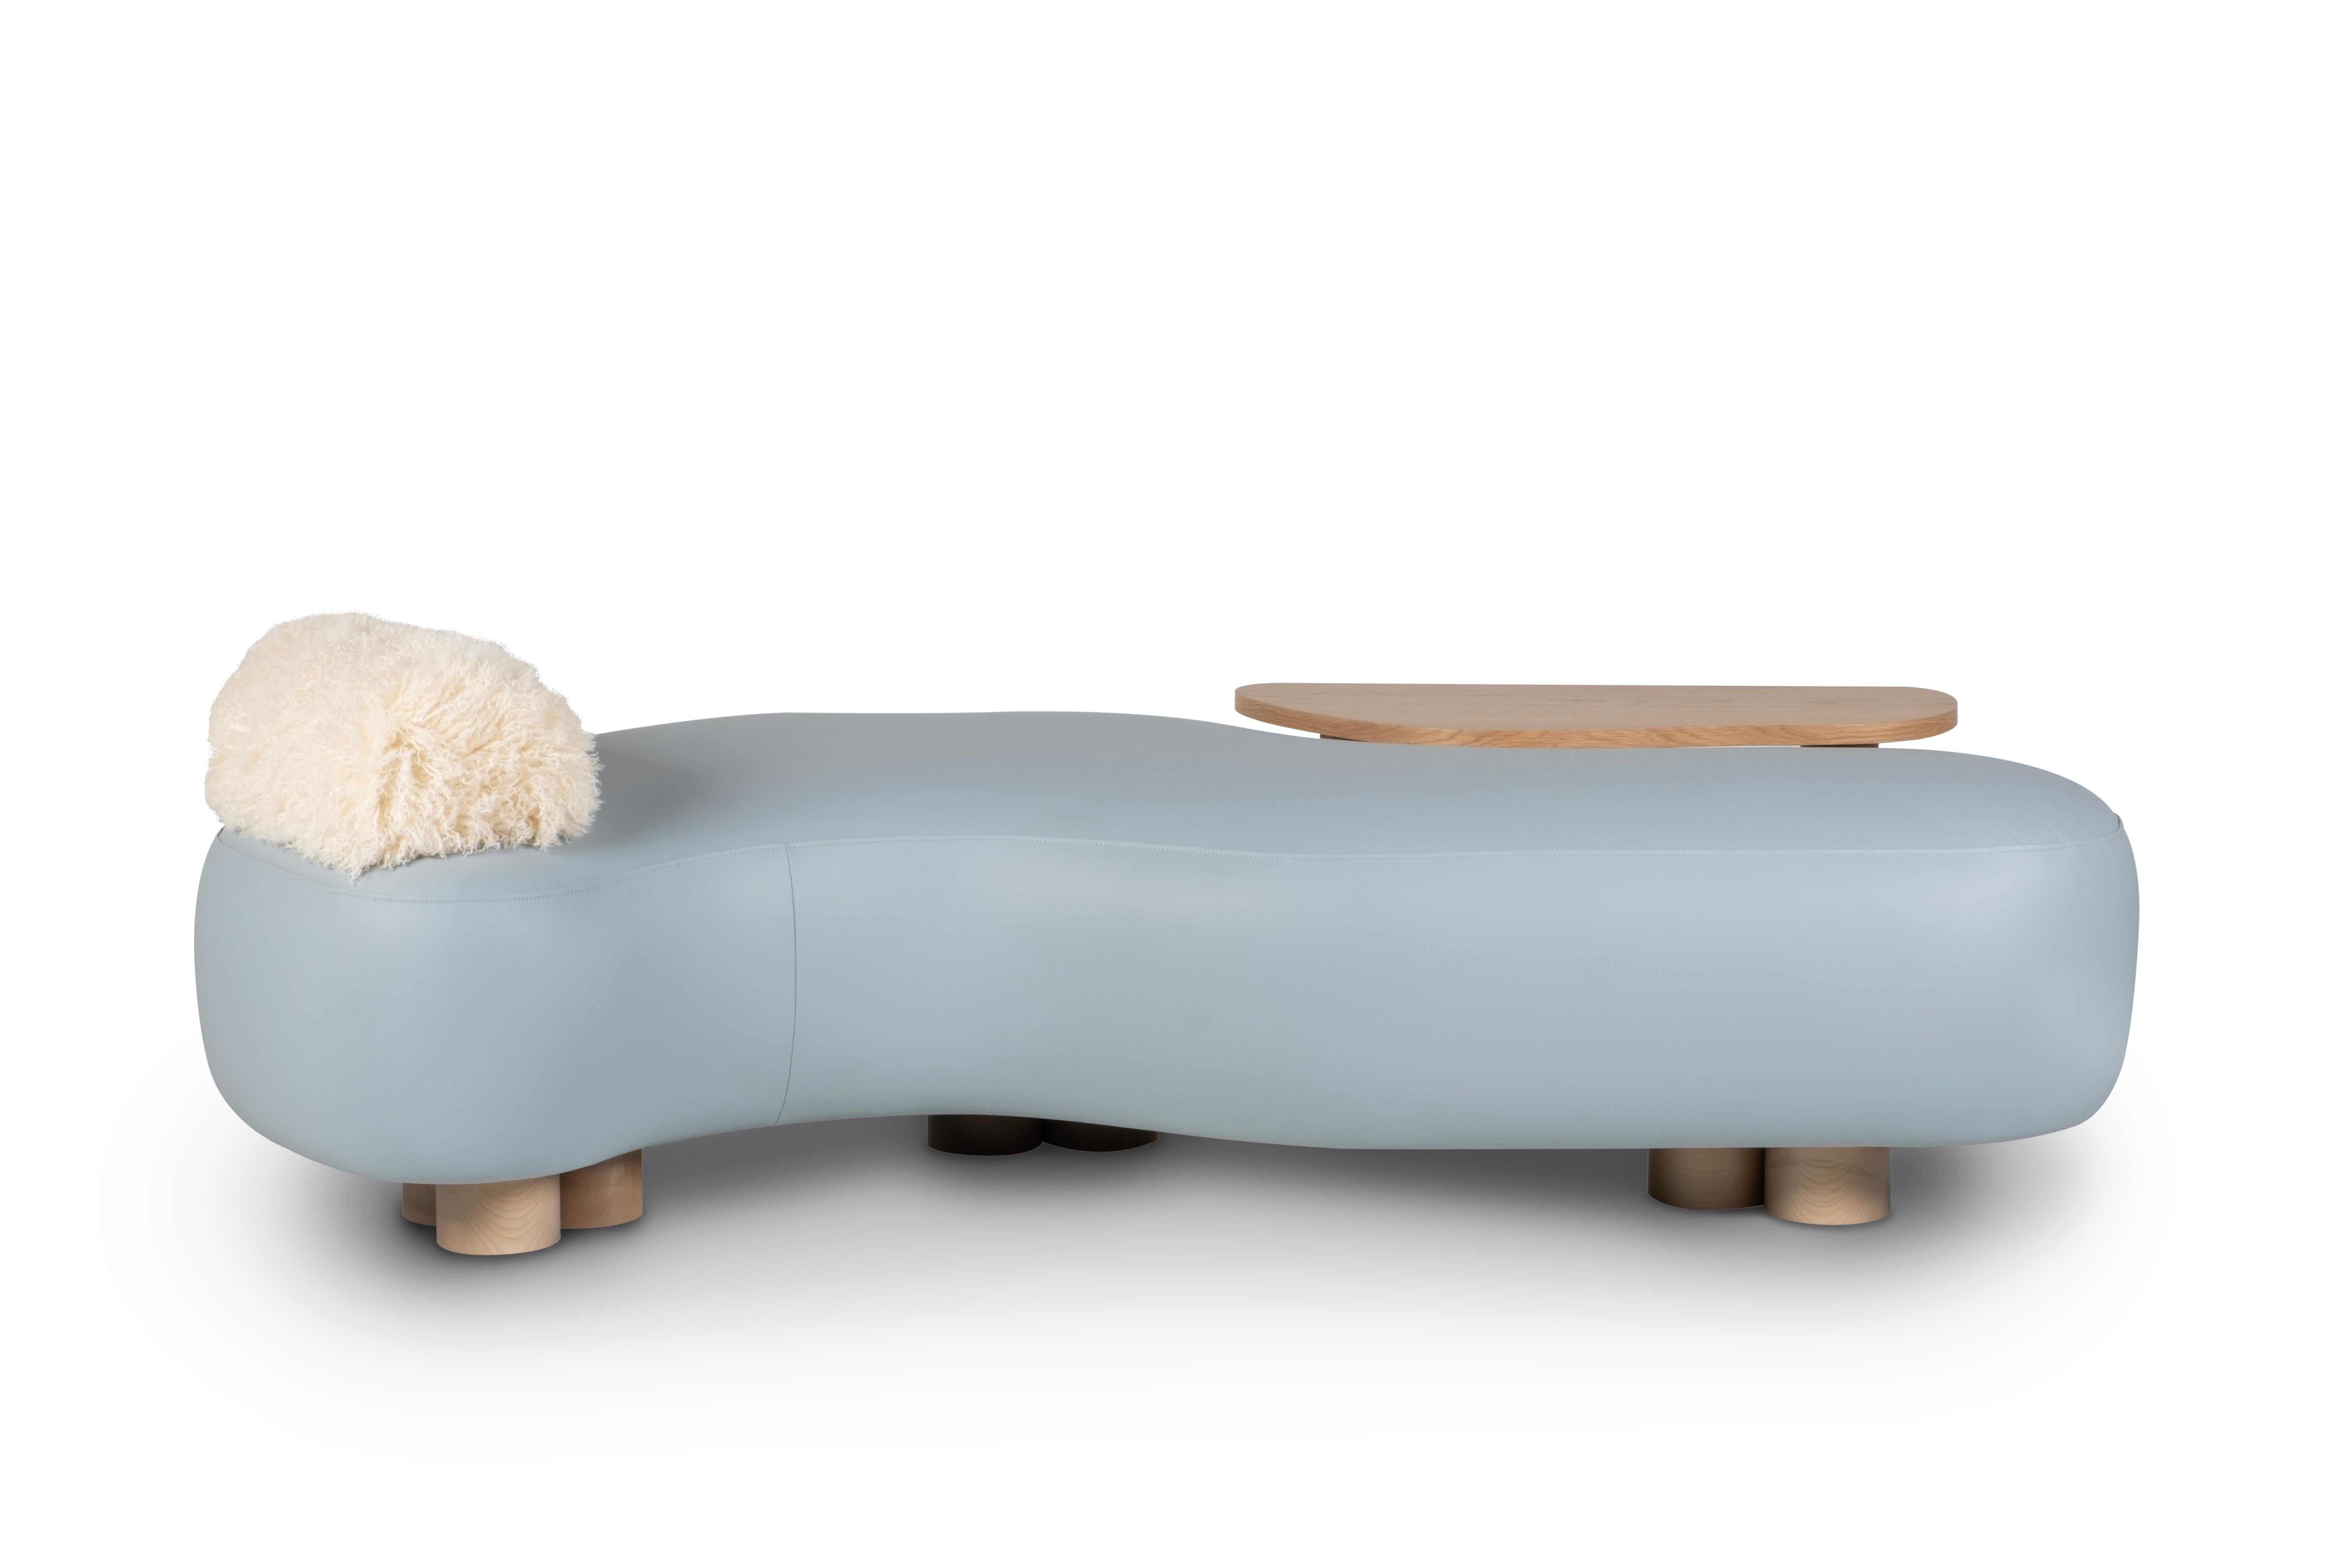 Portuguese Modern Minho Day Bed, Light Blue Leather, Handmade in Portugal by Greenapple For Sale